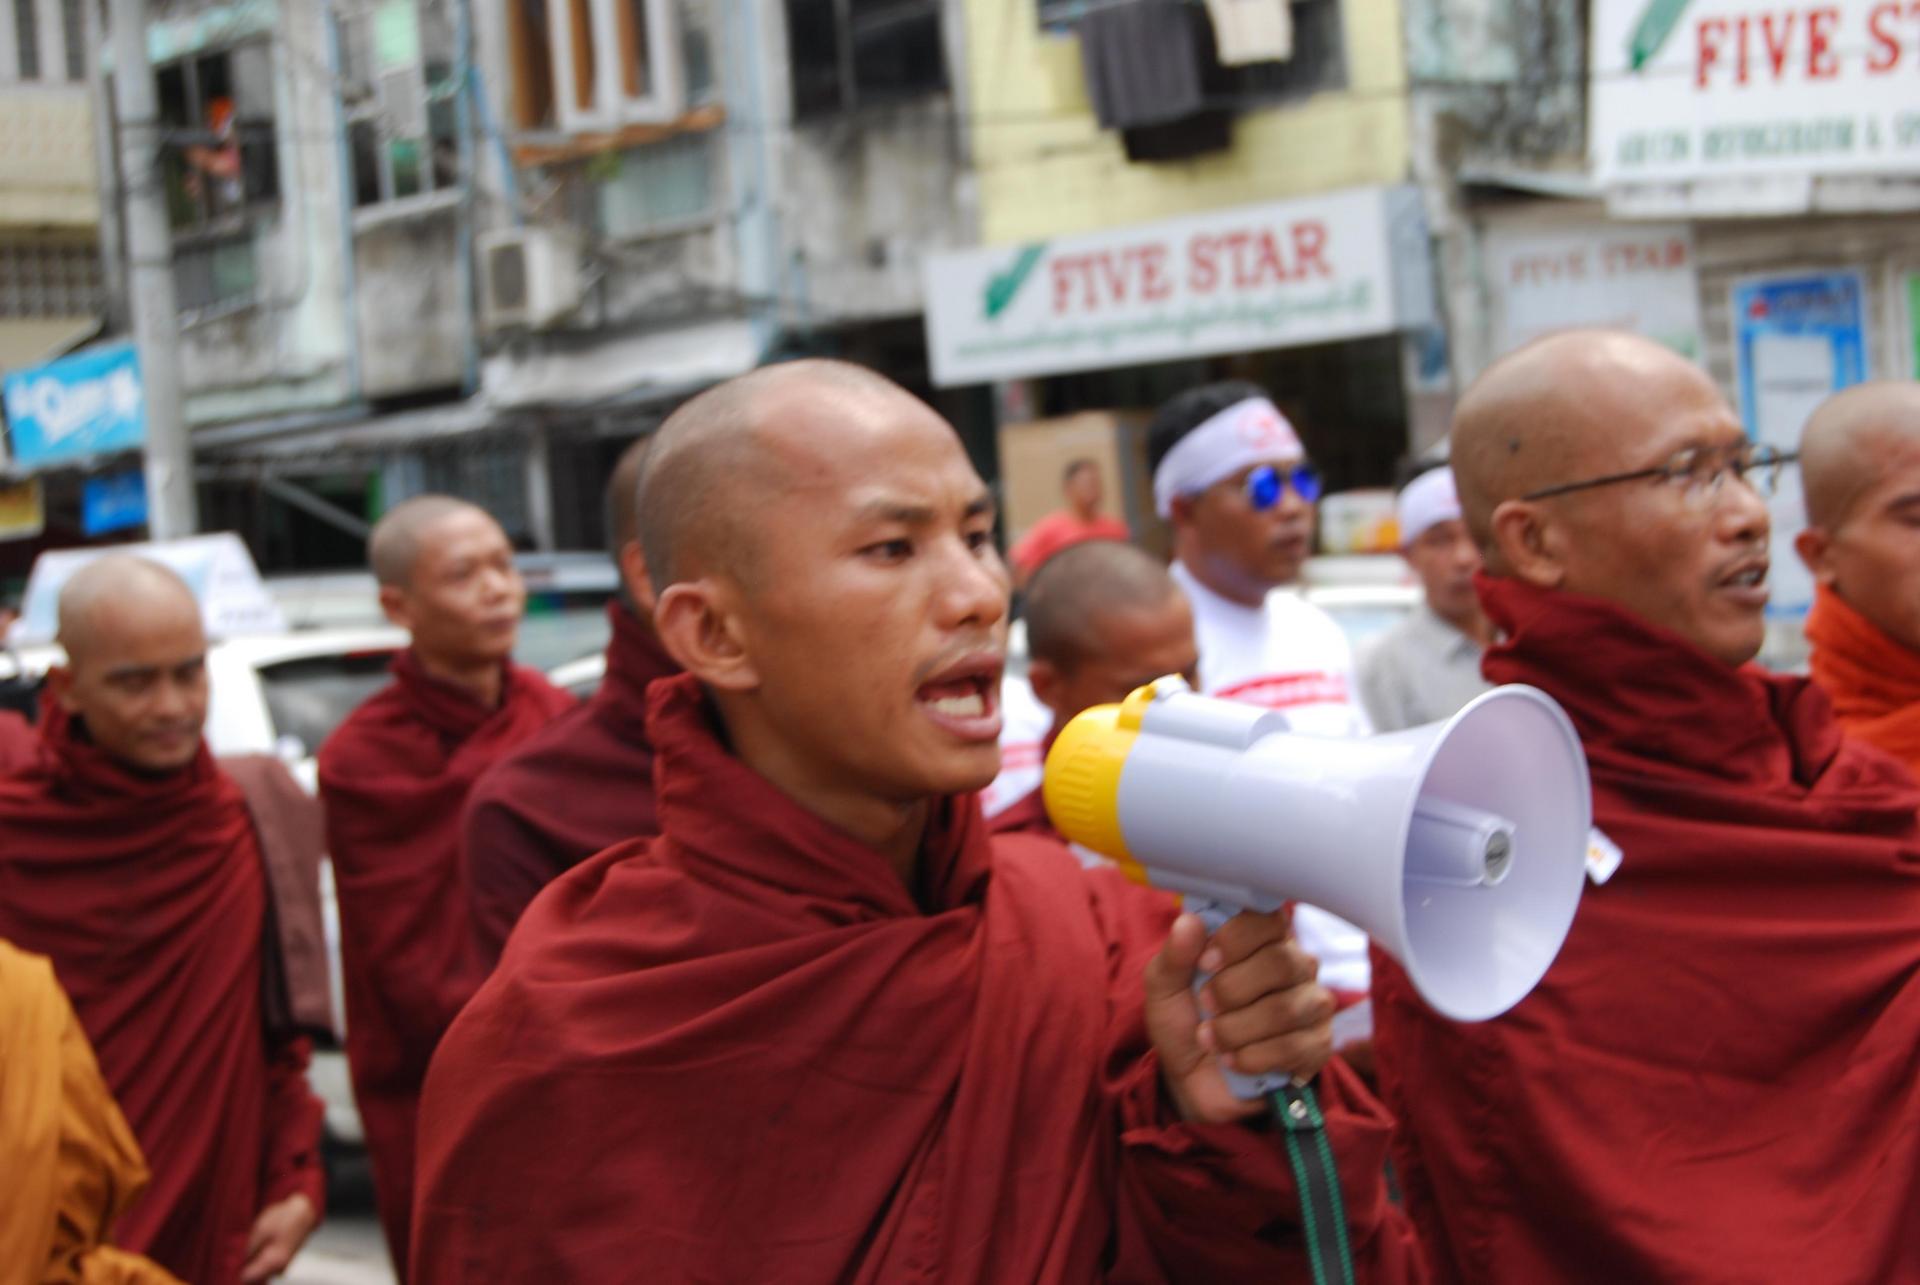 Buddhist monks participate in an anti-Rohingya protest in 2015. Photo: Jacob Goldberg